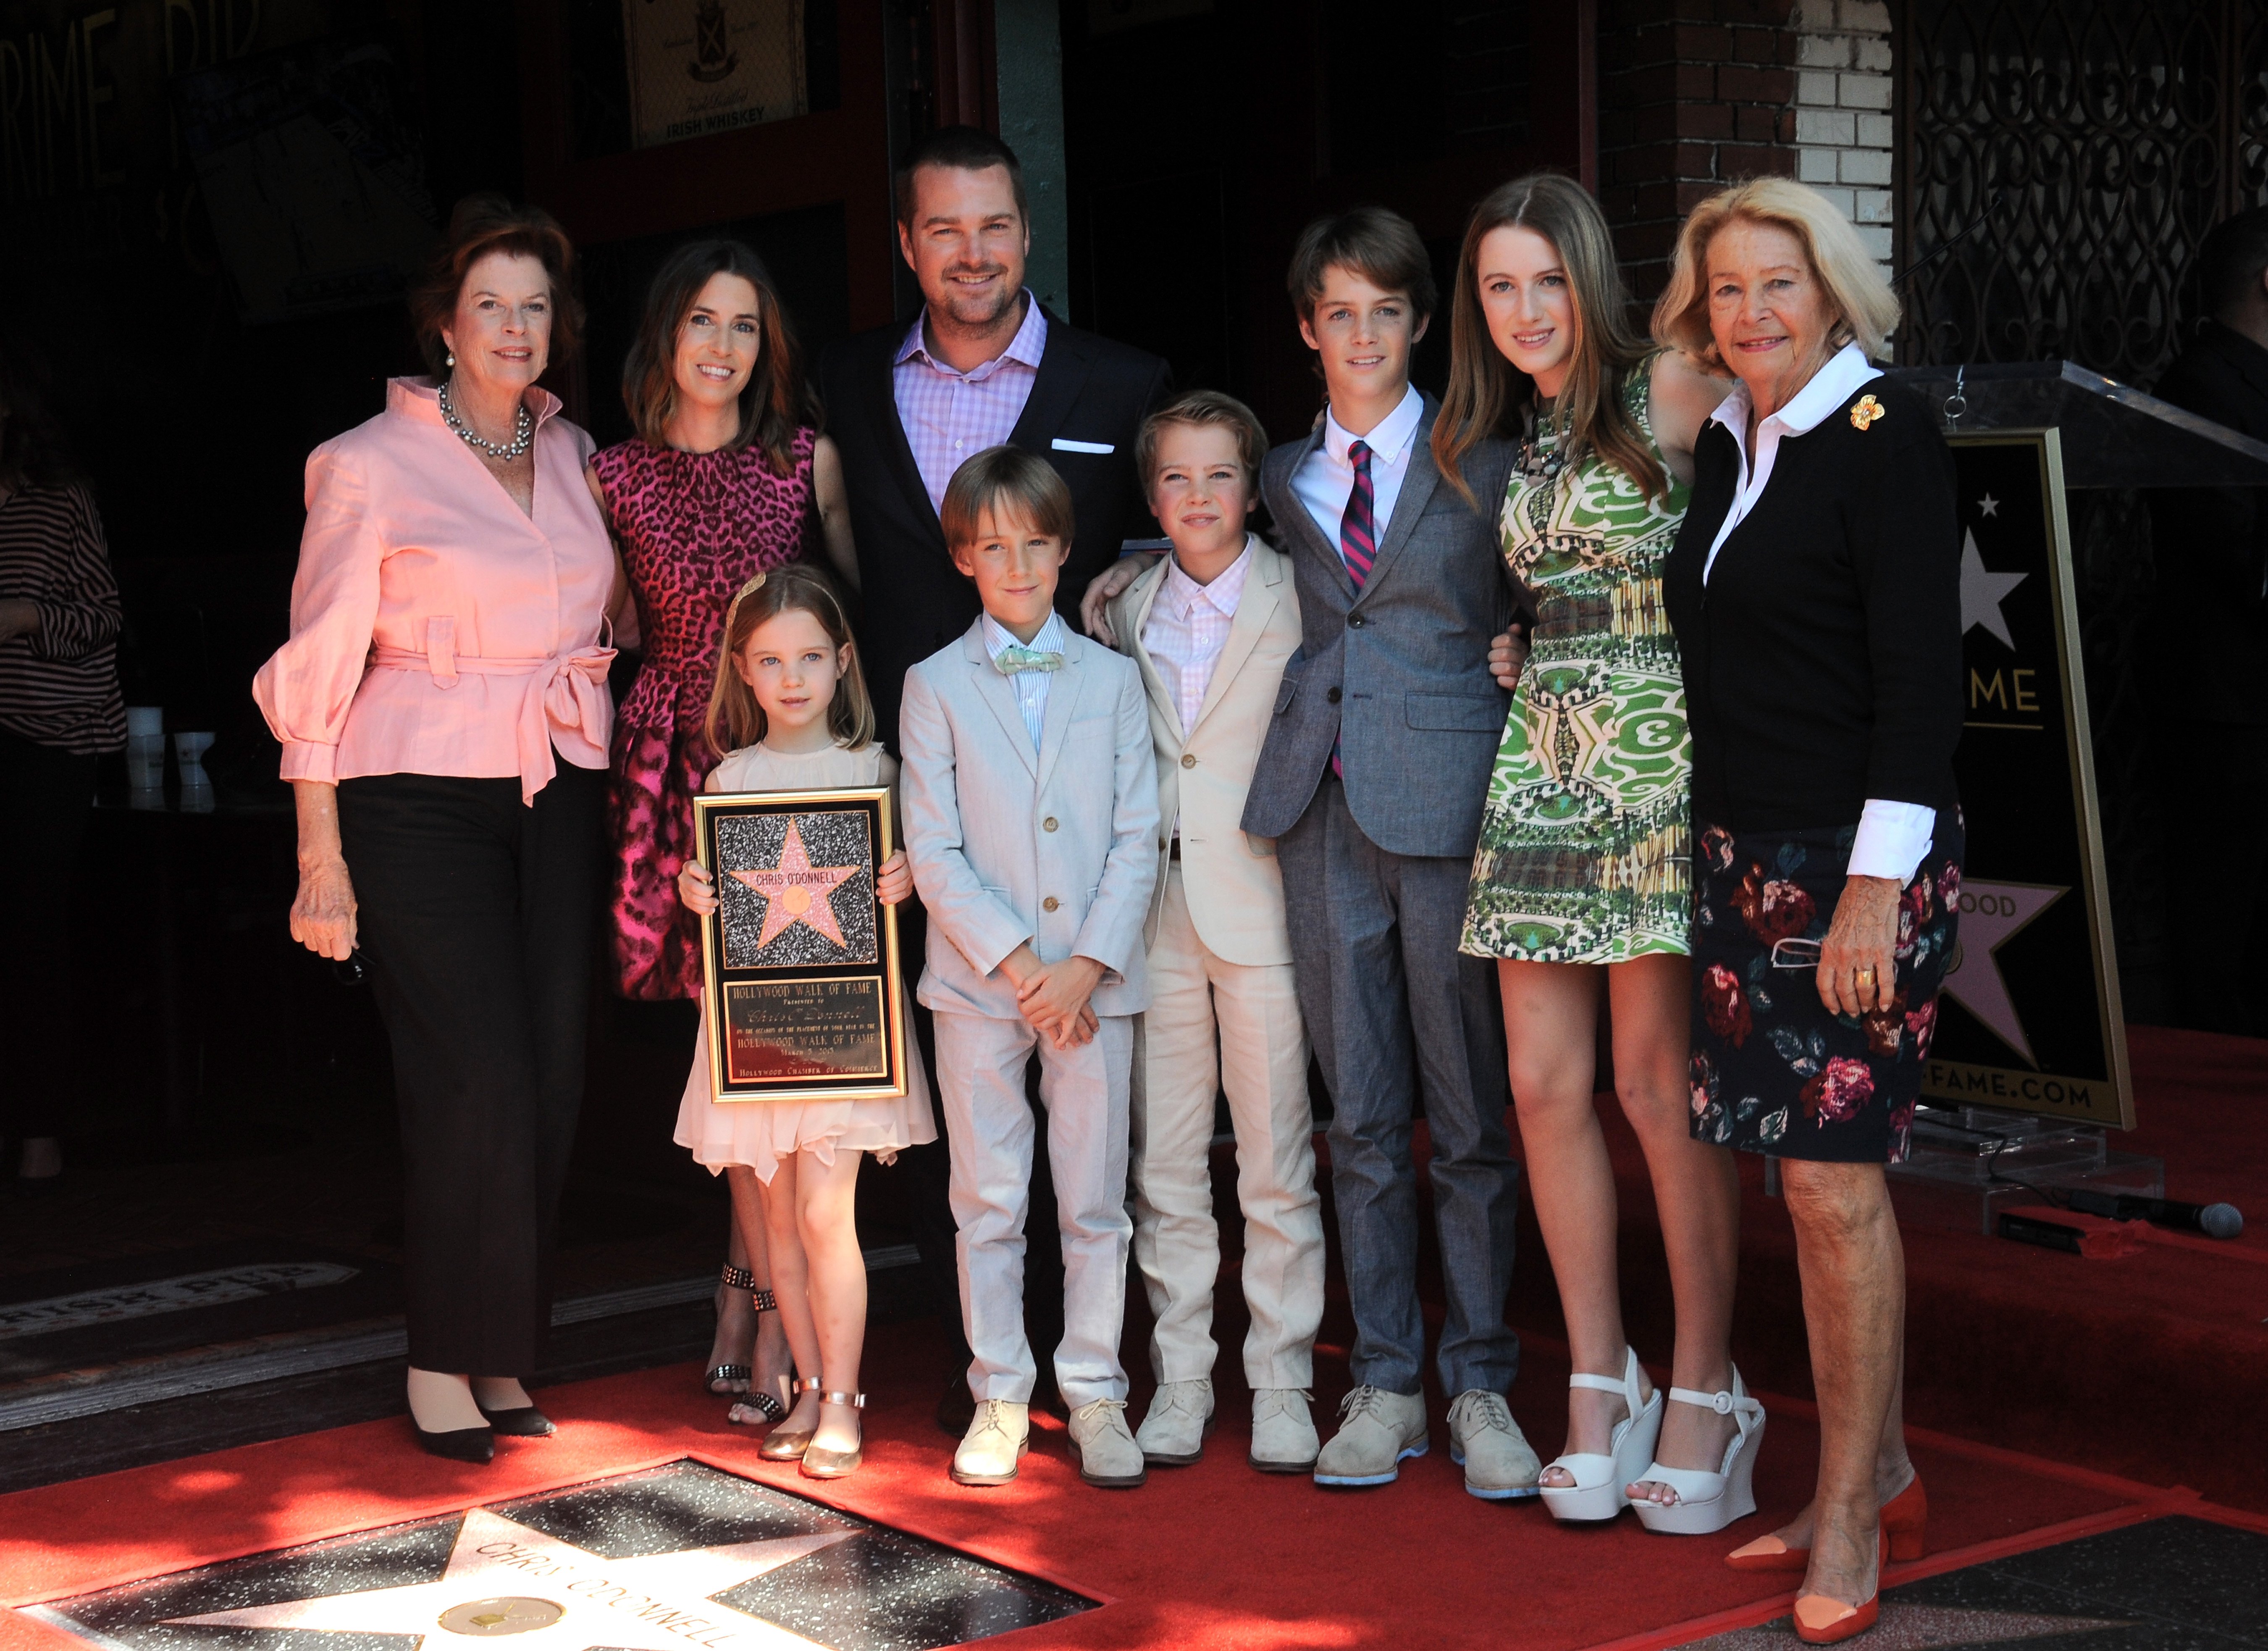 Actor Chris O'Donnell with wife, children, mother and mother-in-law at the Chris O'Donnell Star Ceremony On The Hollywood Walk Of Fame on March 5, 2015 in Hollywood, California. | Photo: Getty Images